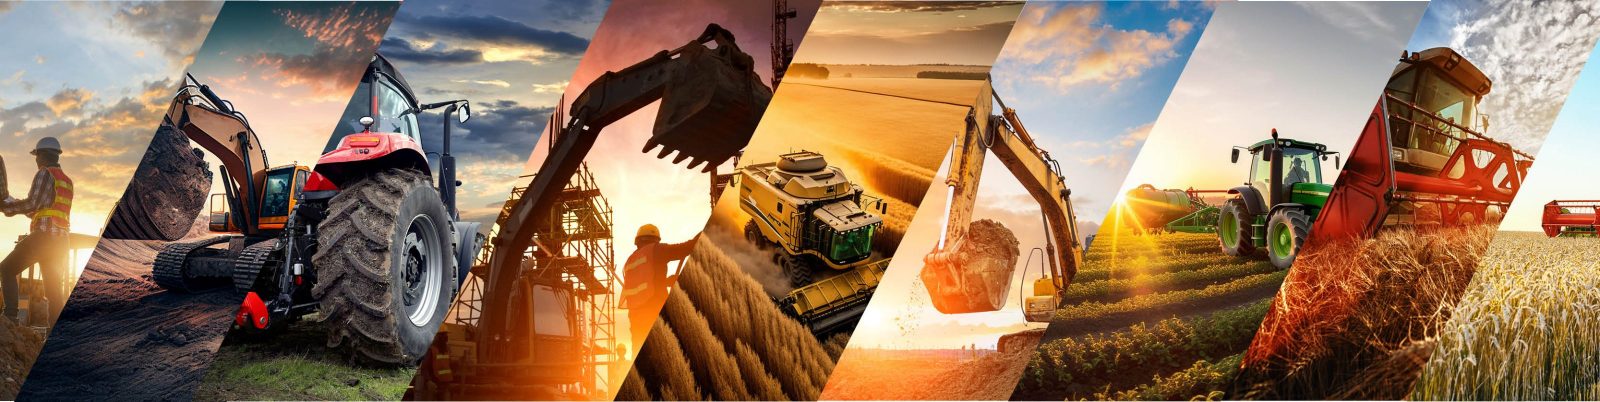 Axalta coatings for Agricultural, Construction & Earth moving equipment